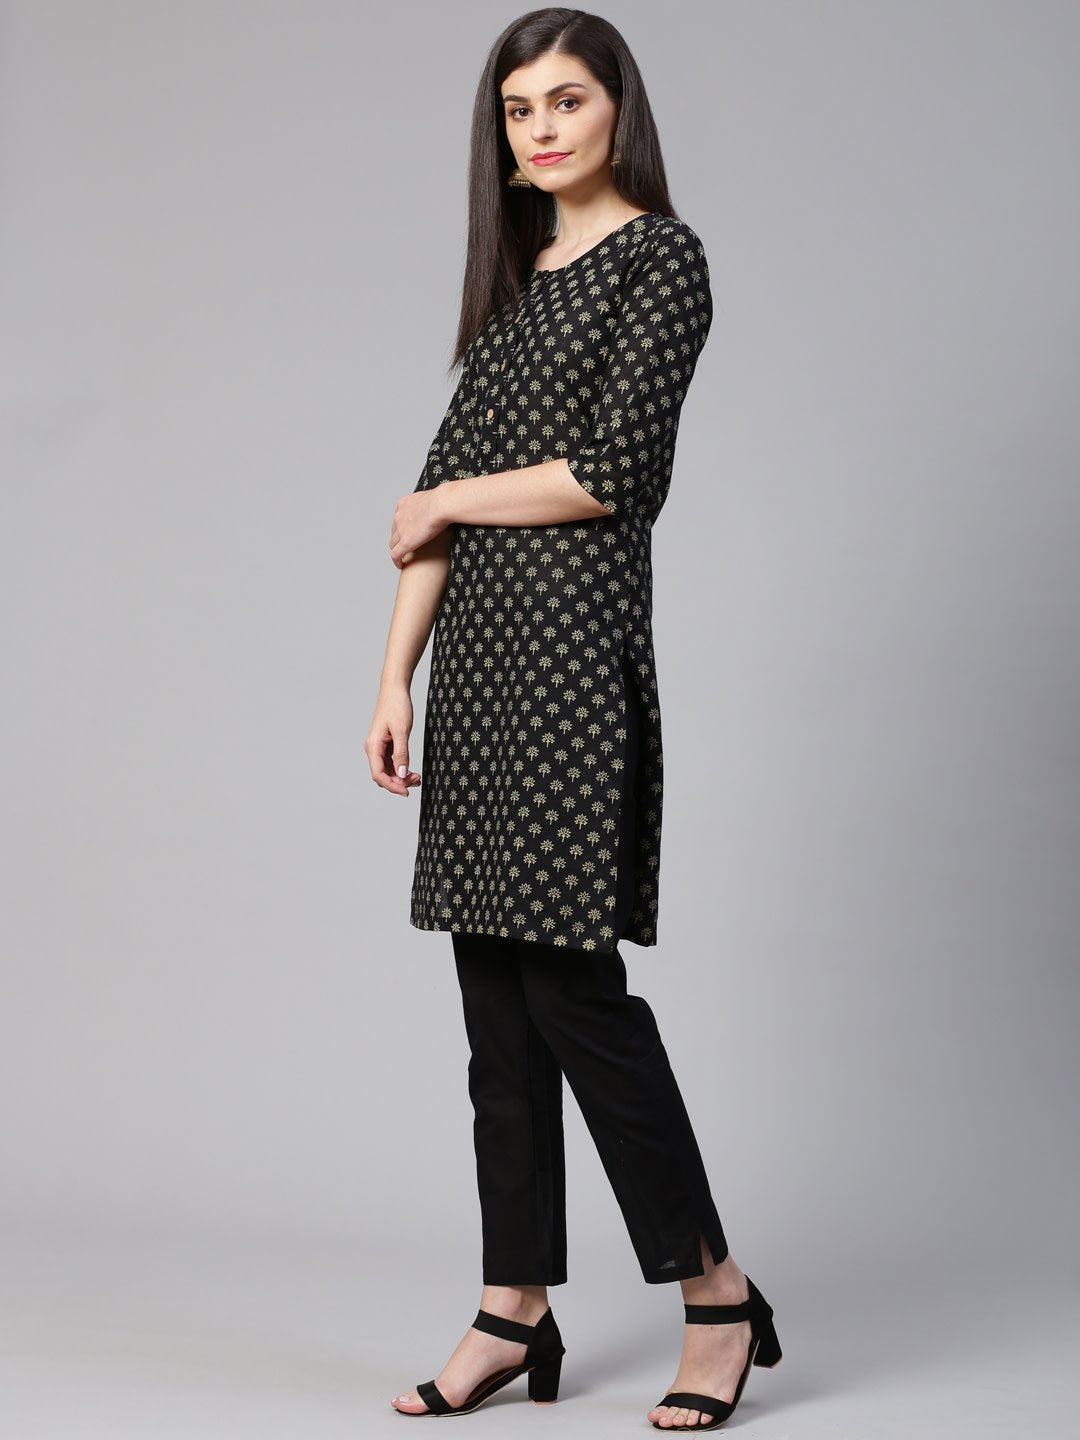 Women's Black and Beige Printed Kurta with Trousers       - Jompers